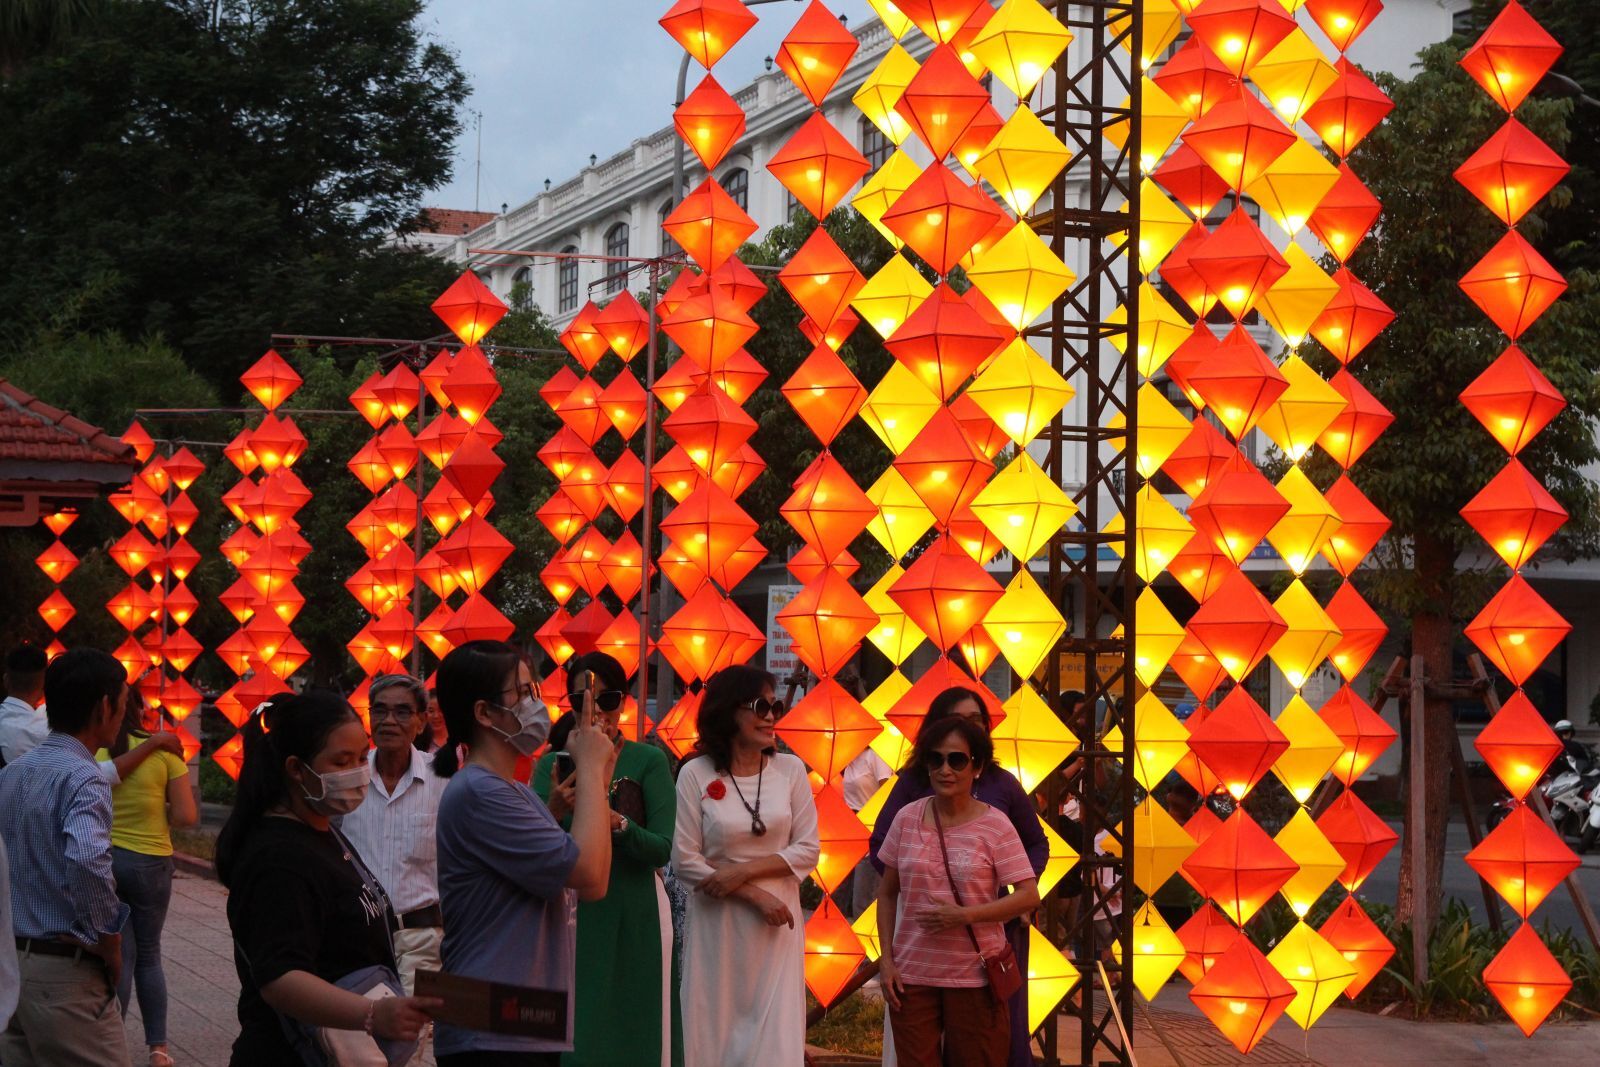 A large number of people and tourists coming to visit the lantern display space